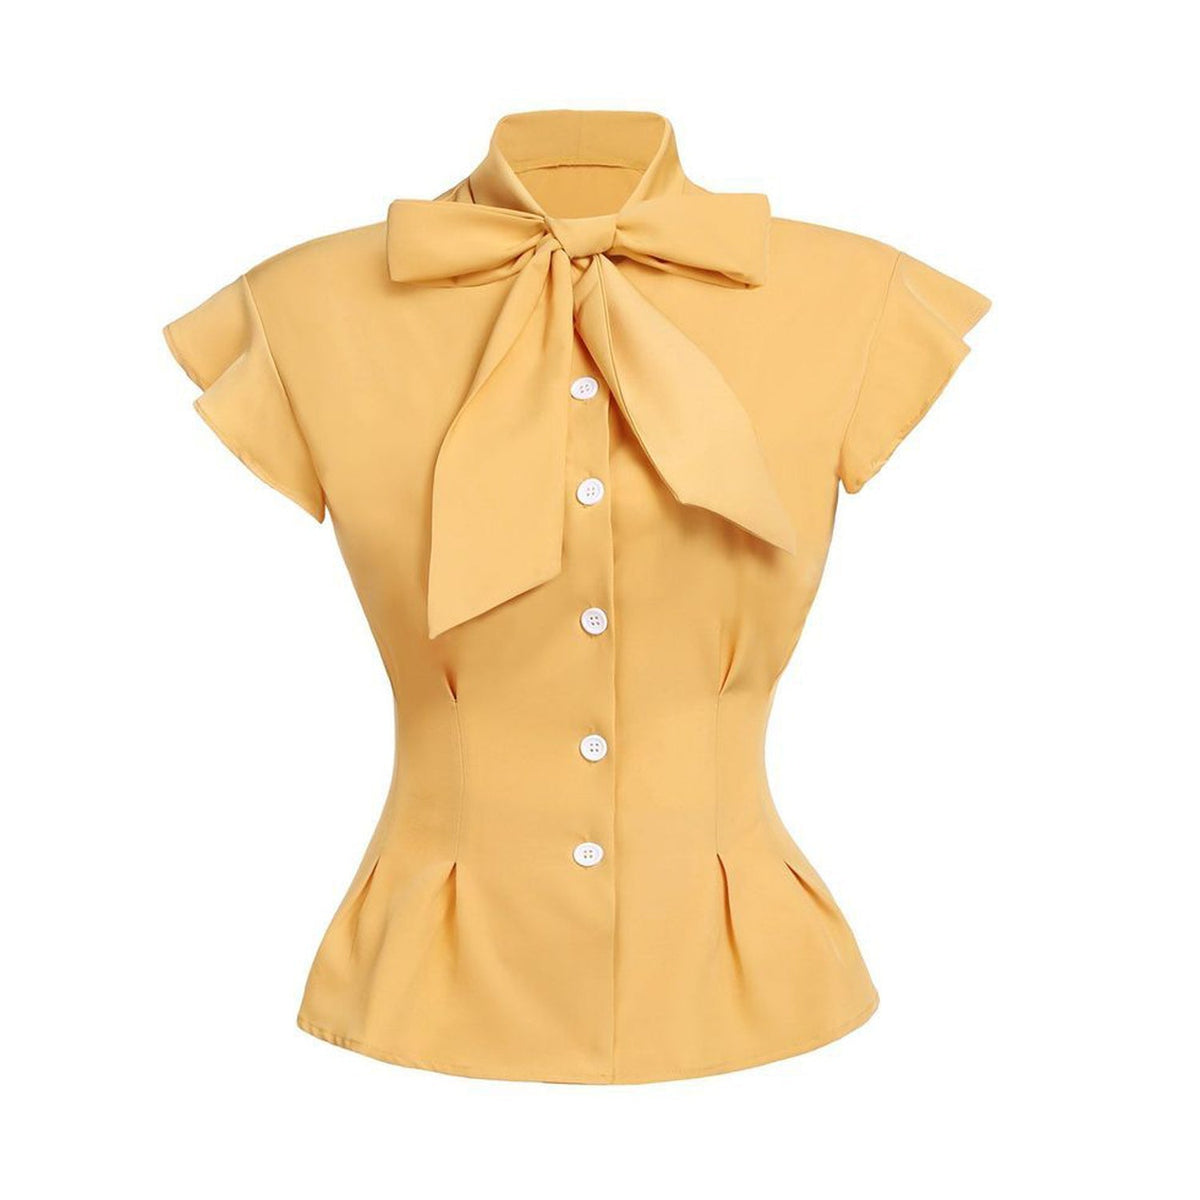 Women's Vintage Short cap Sleeve Slim Fit 1950s Tops Blouse with bowknot(S-2XL) Sai Feel